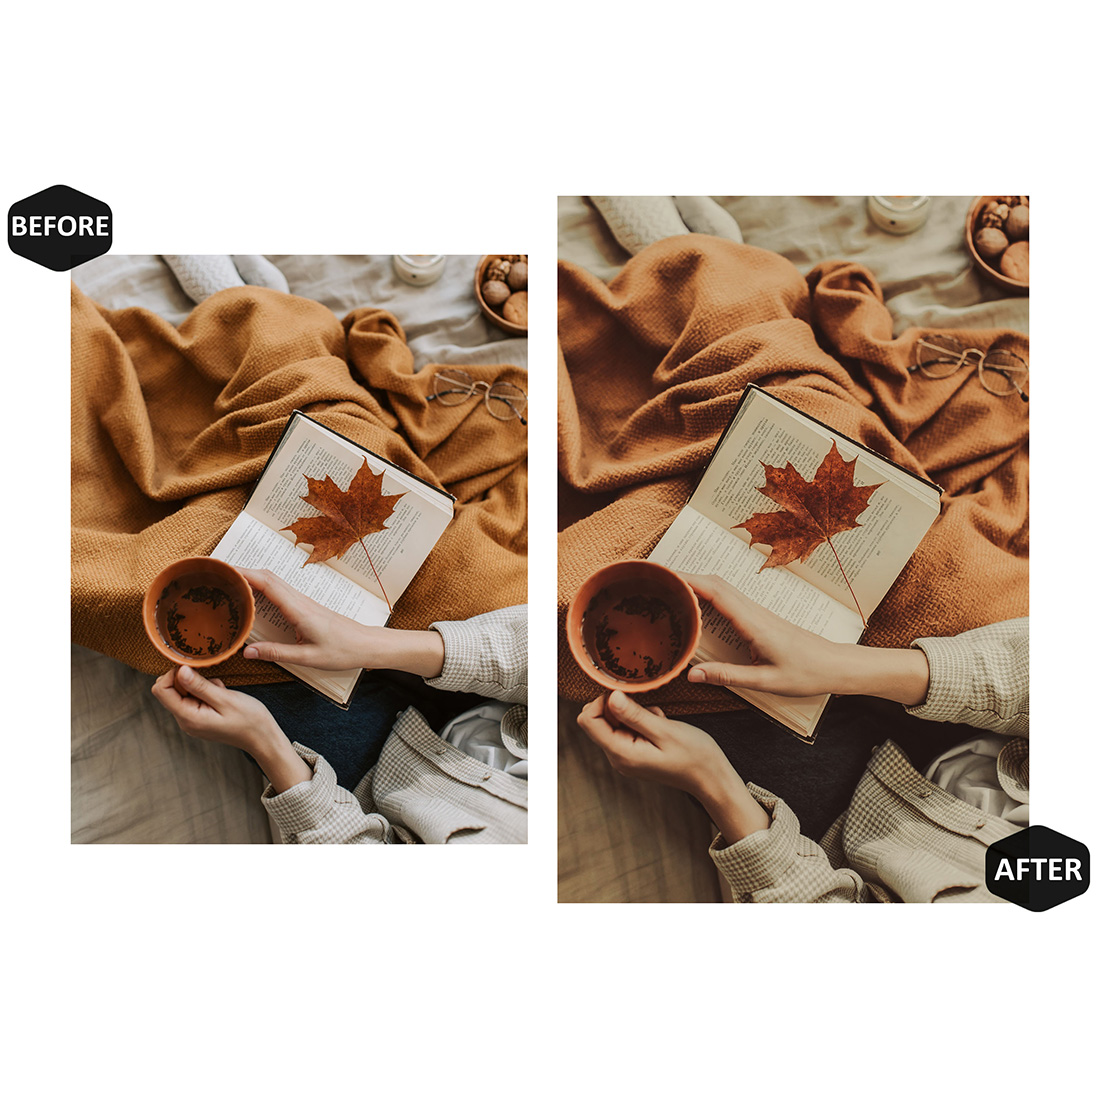 12 Photoshop Actions, Colder But Happier Ps Action, Autumn Bright ACR Preset, Warm Fall Ps Filter, Atn Portrait And Lifestyle Theme For Instagram, Blogger preview image.